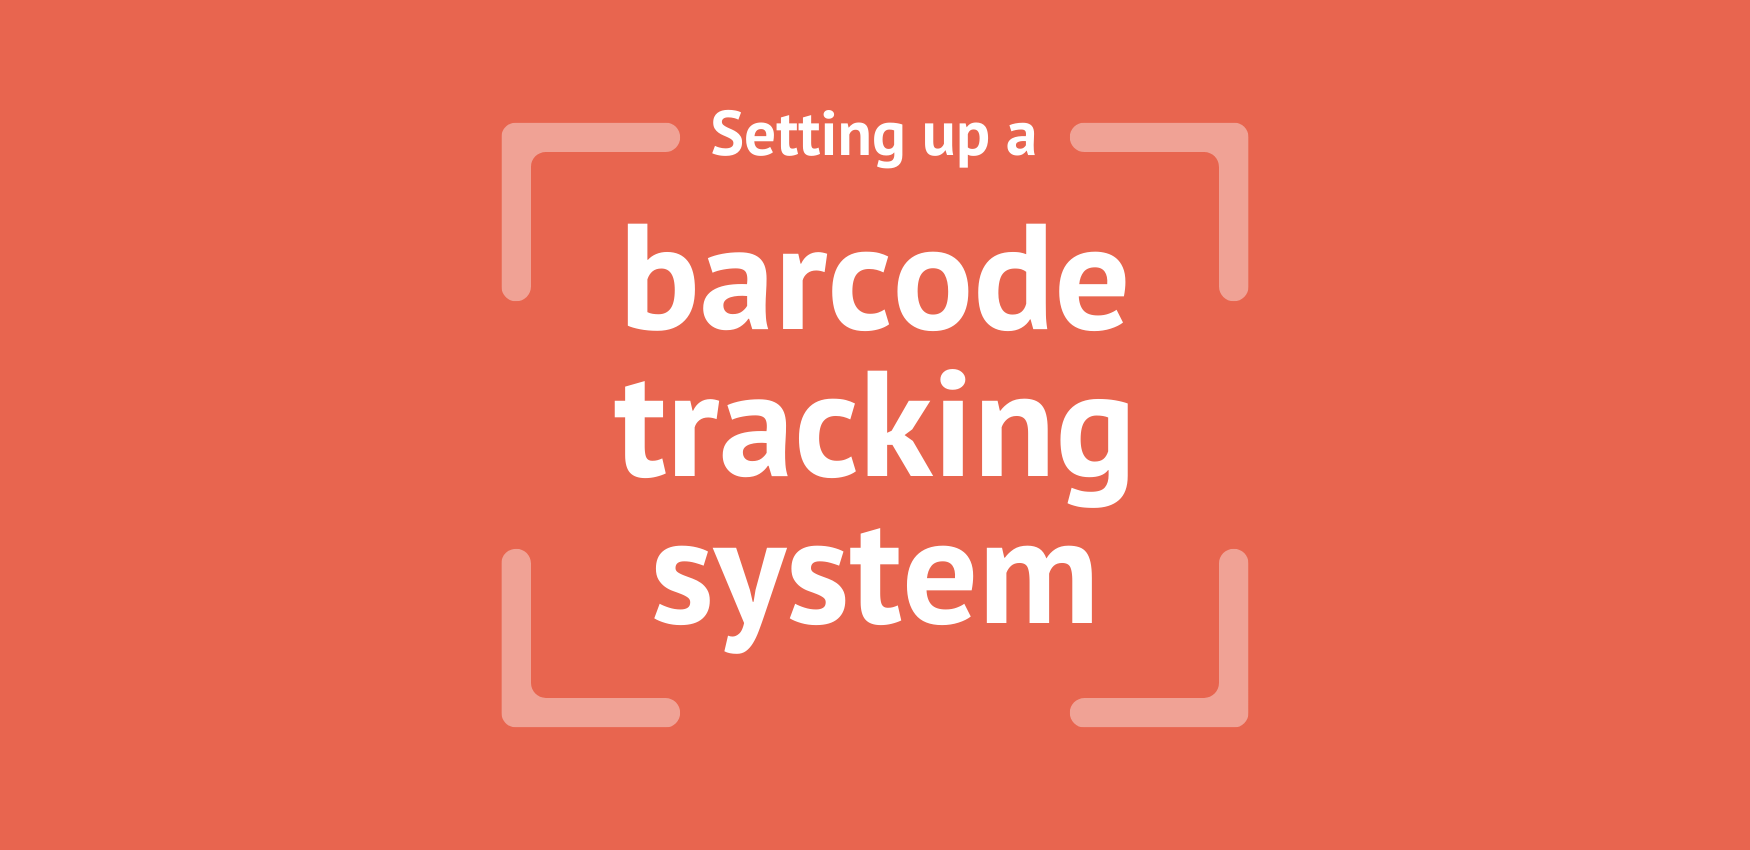 5 Best Practices for Setting Up a Barcode Tracking System